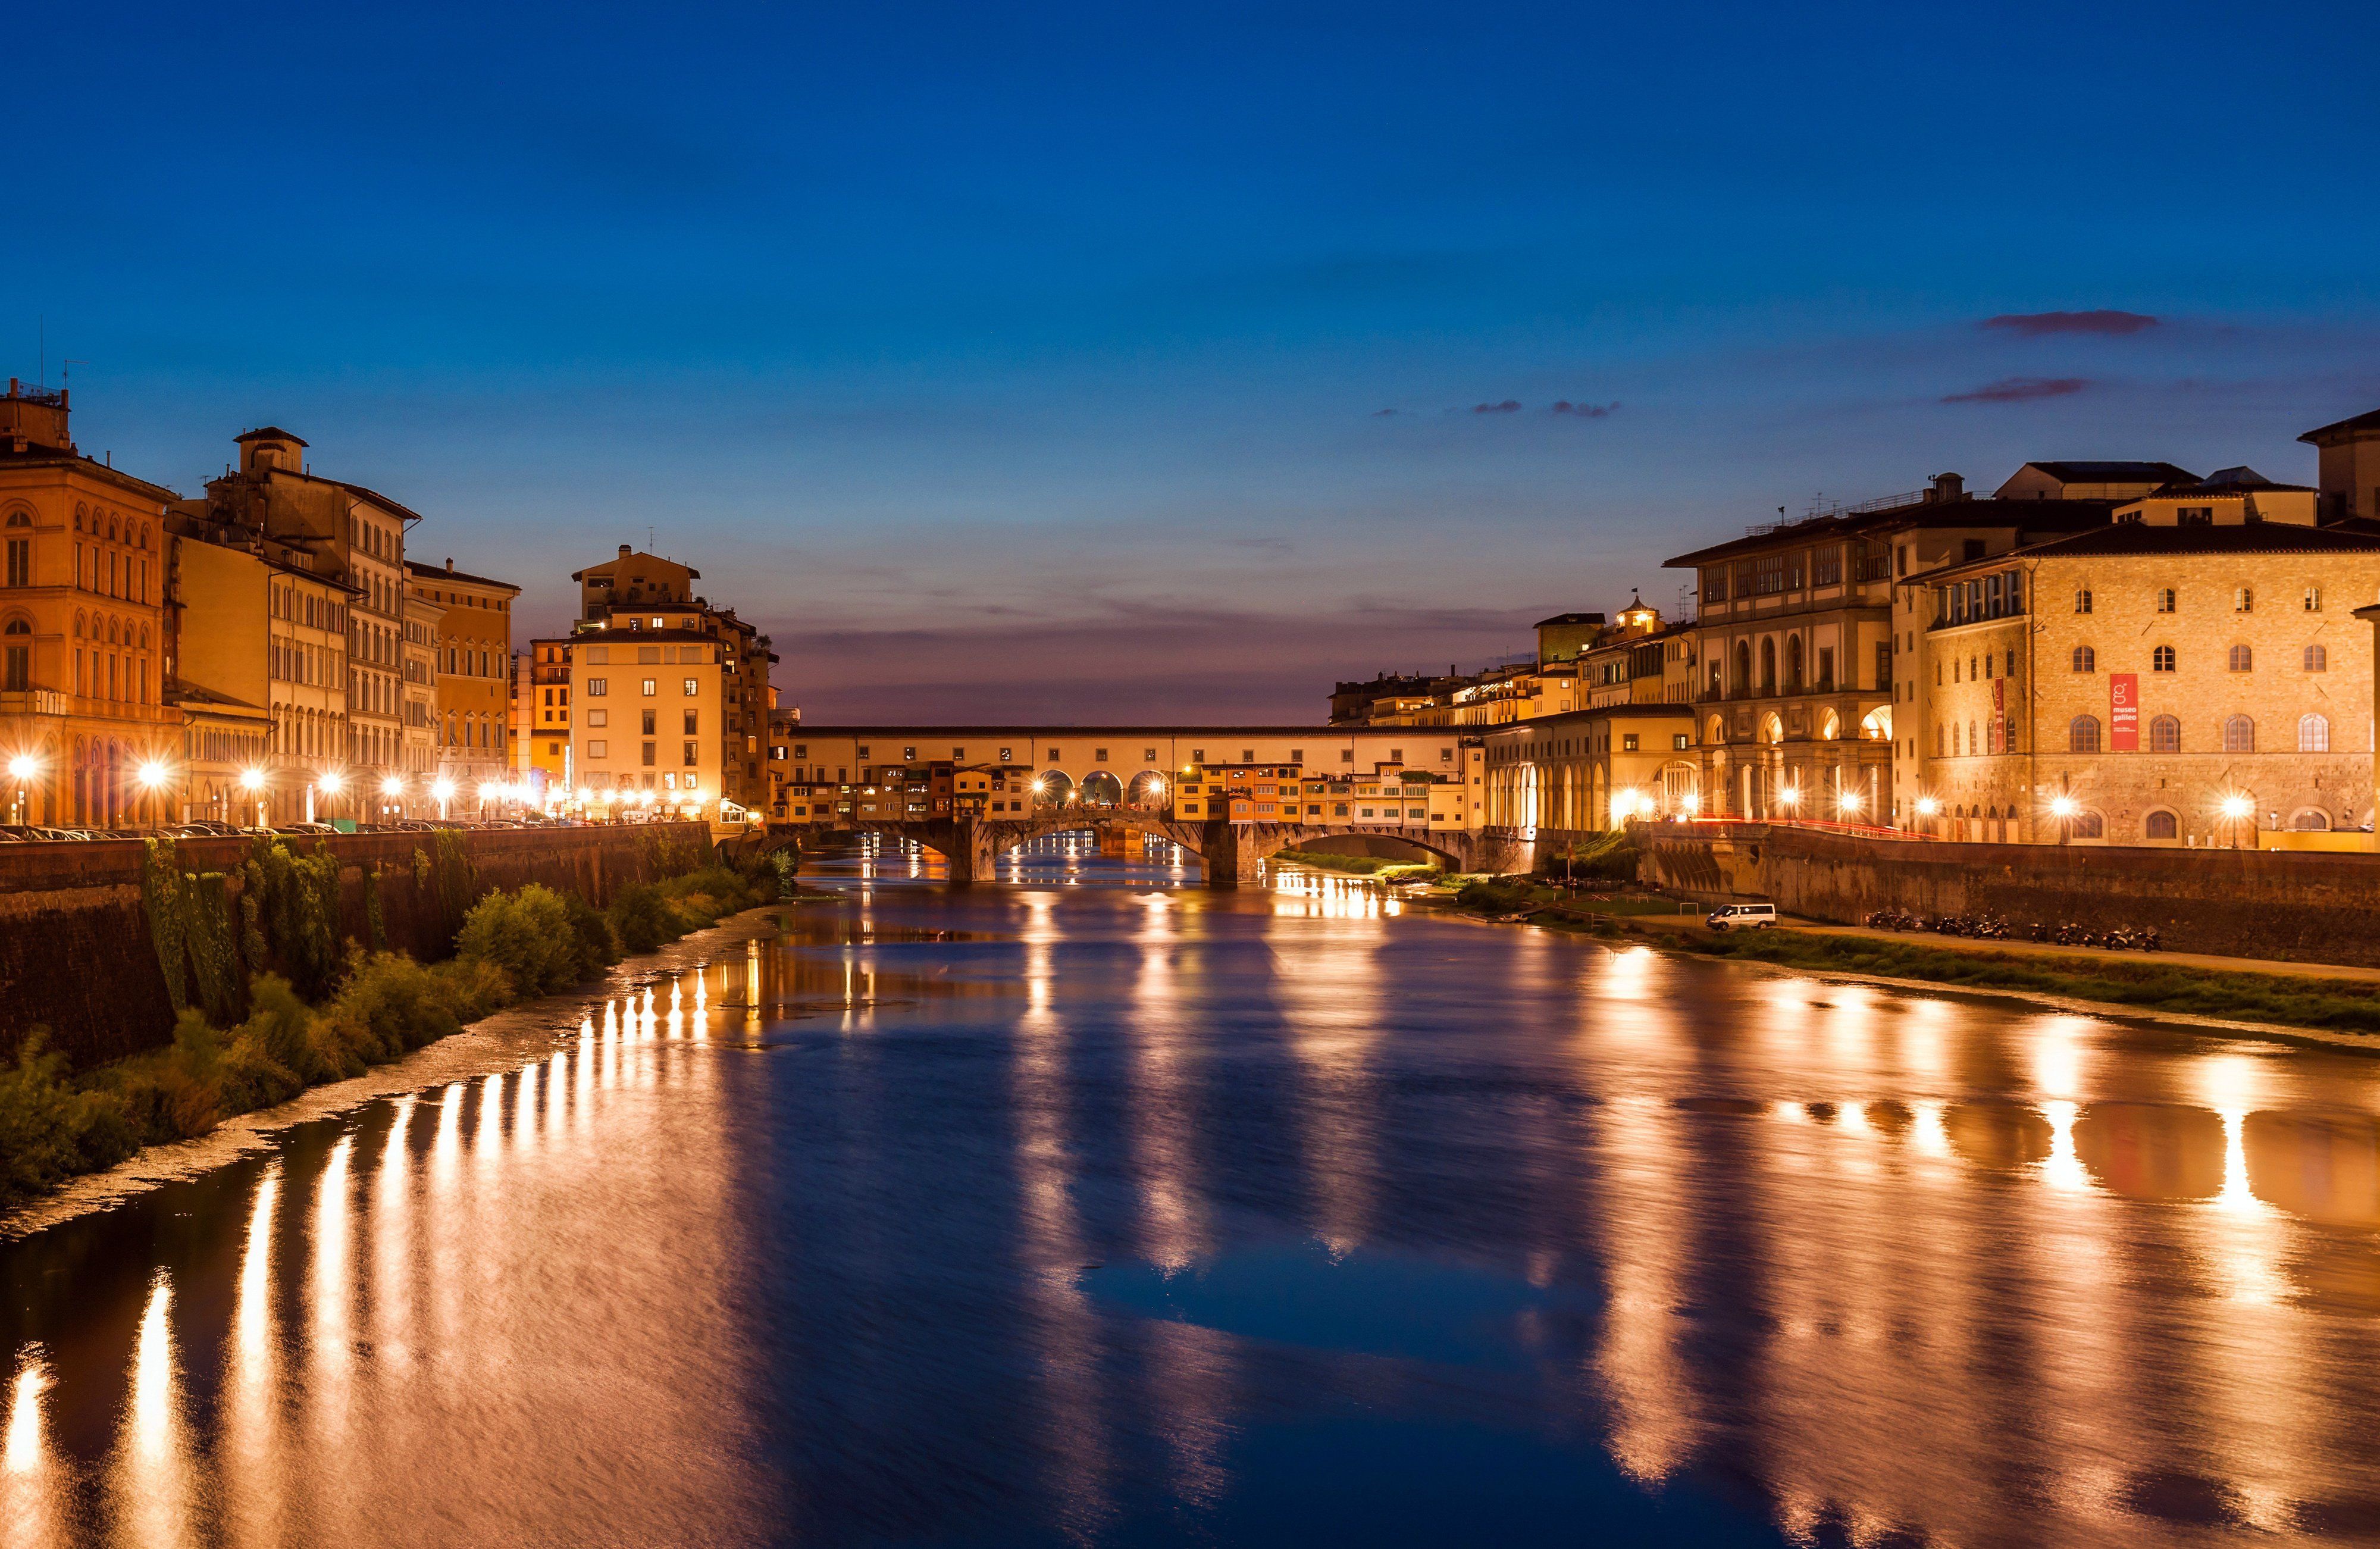 Florence Night Italy Free Download Image. Italy, Florence italy, Tuscany italy